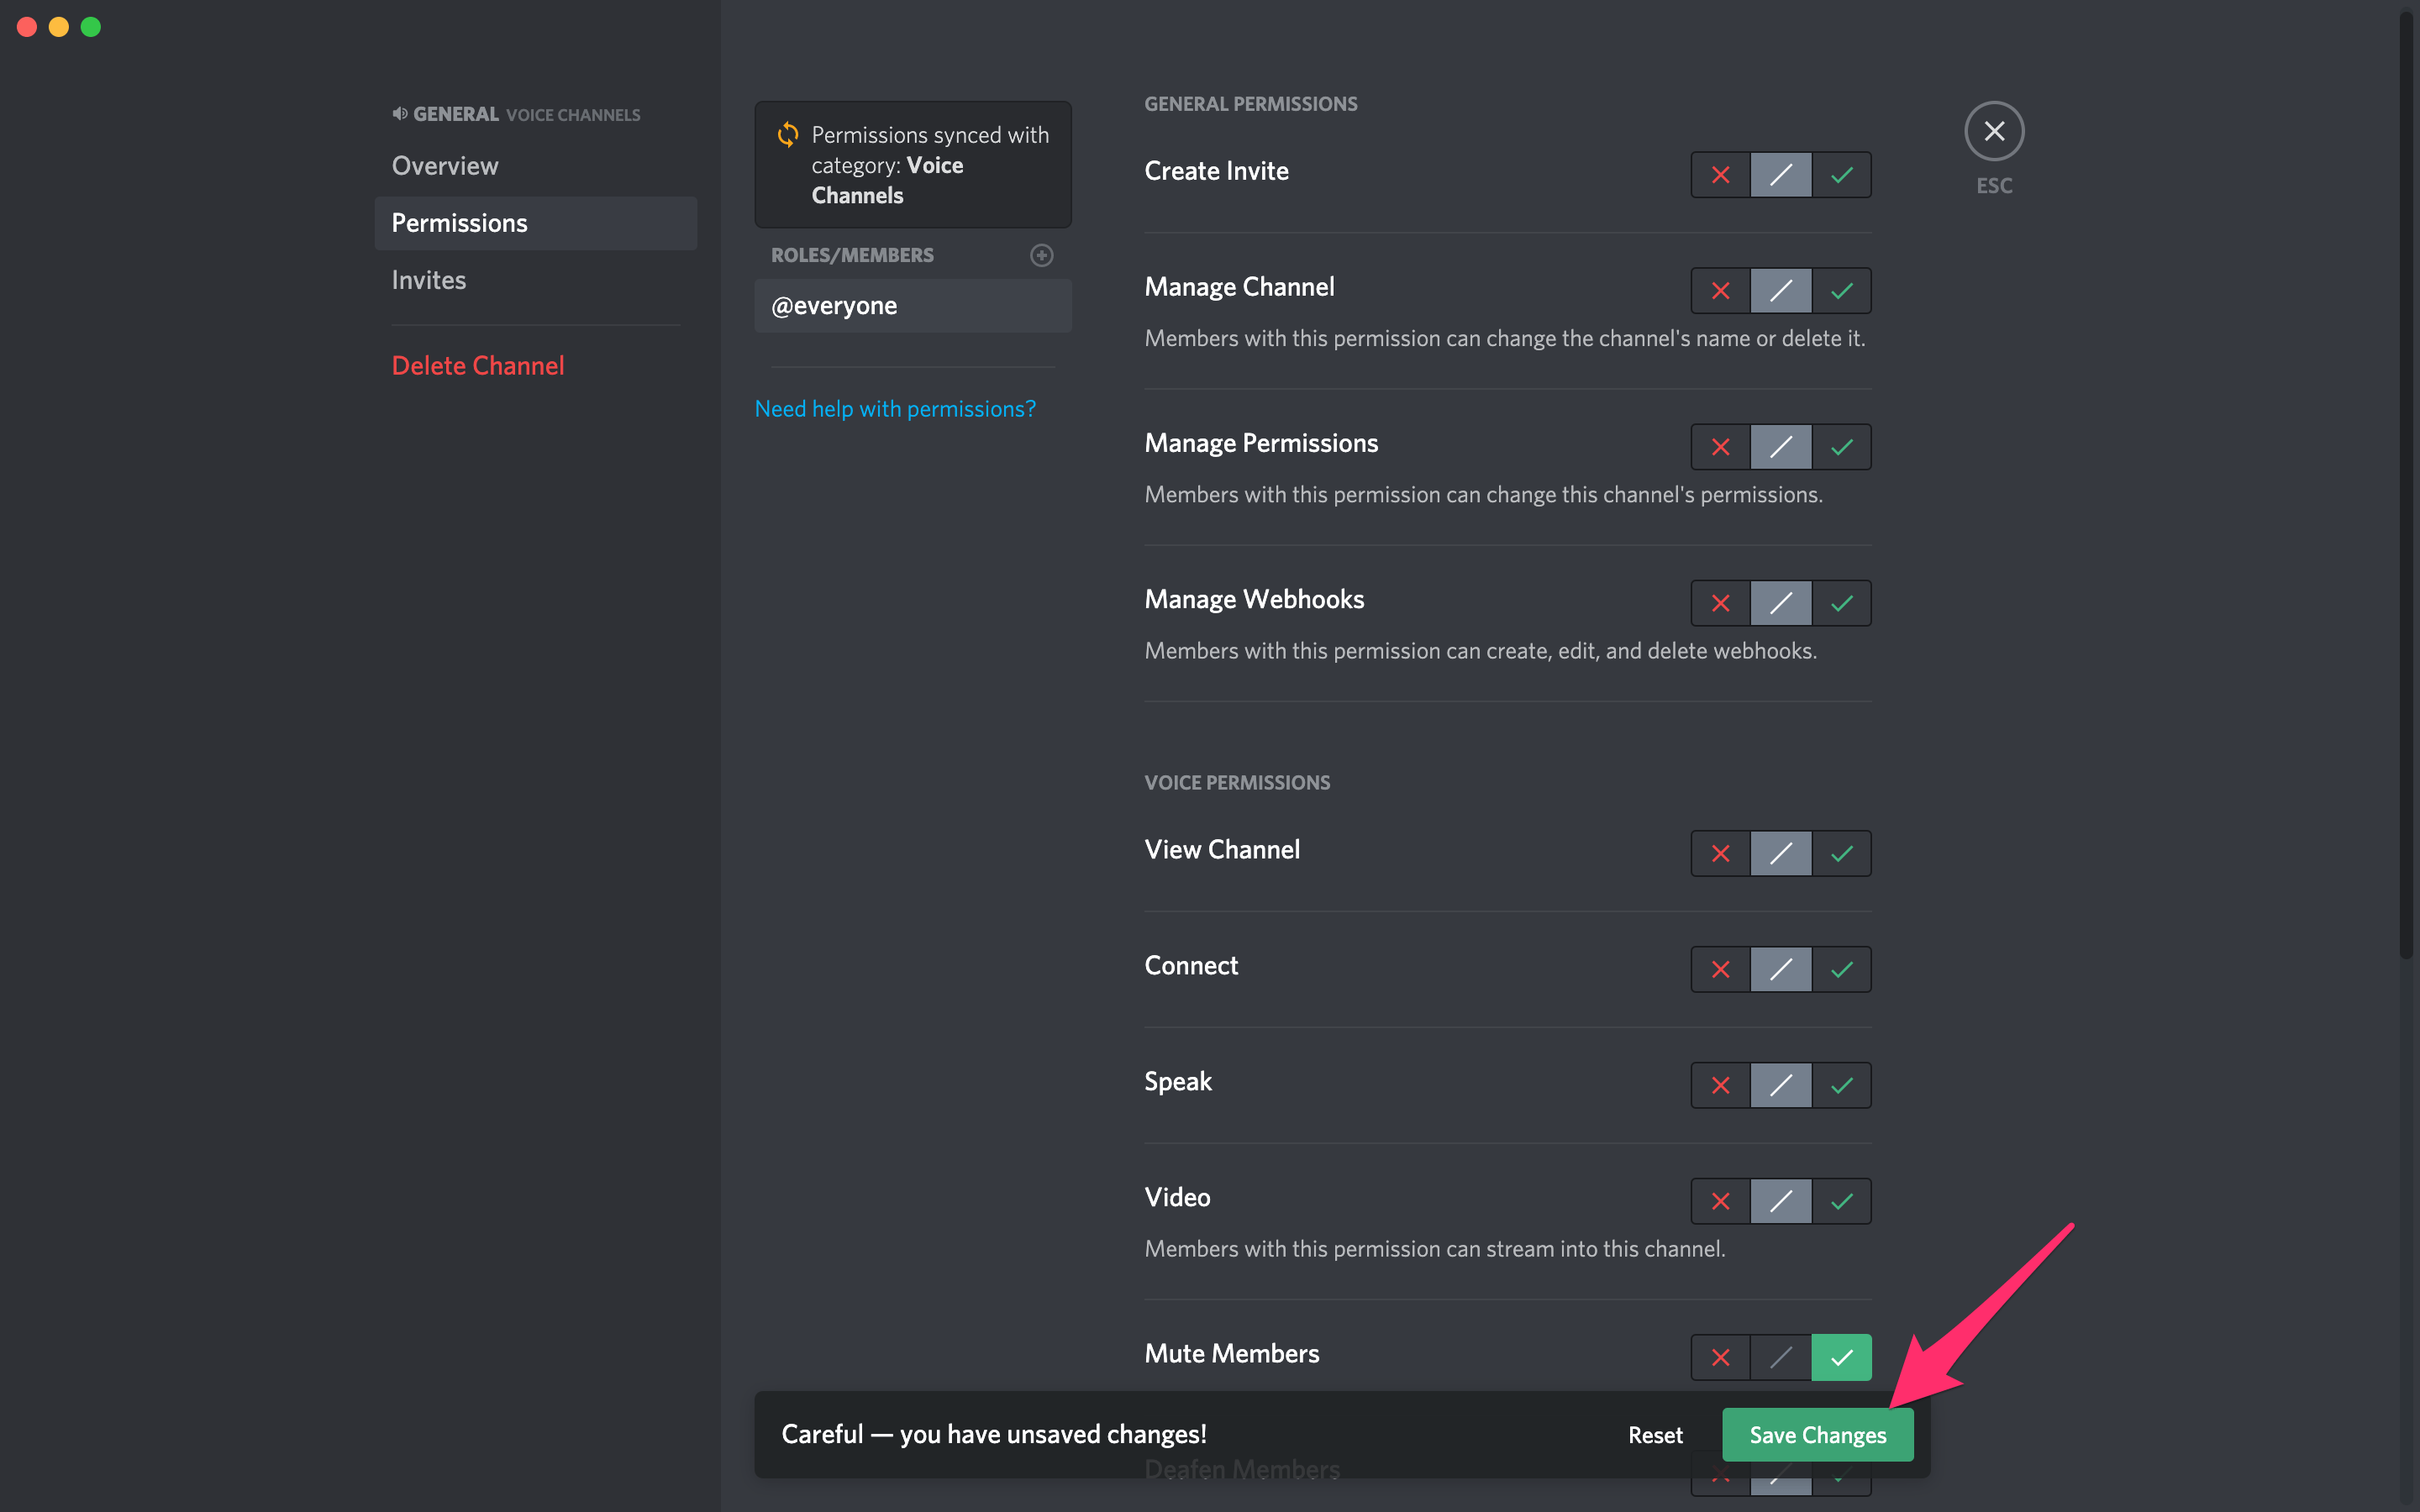 How to leave a voice channel in discord